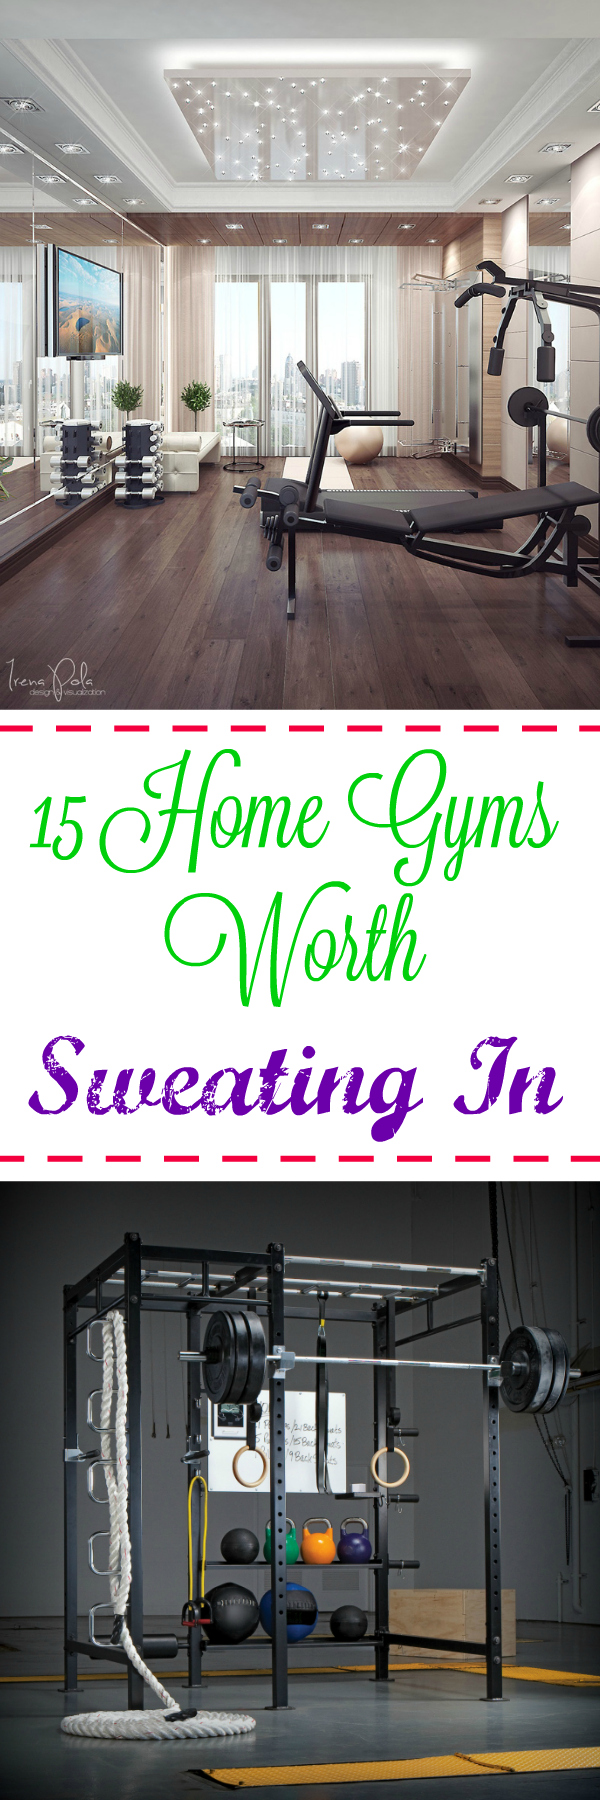 15 Home Gyms Worth Sweating In: Need some help with motivation? A gorgeous, stylish home gym will make you want to spend hours sweating in there every week.